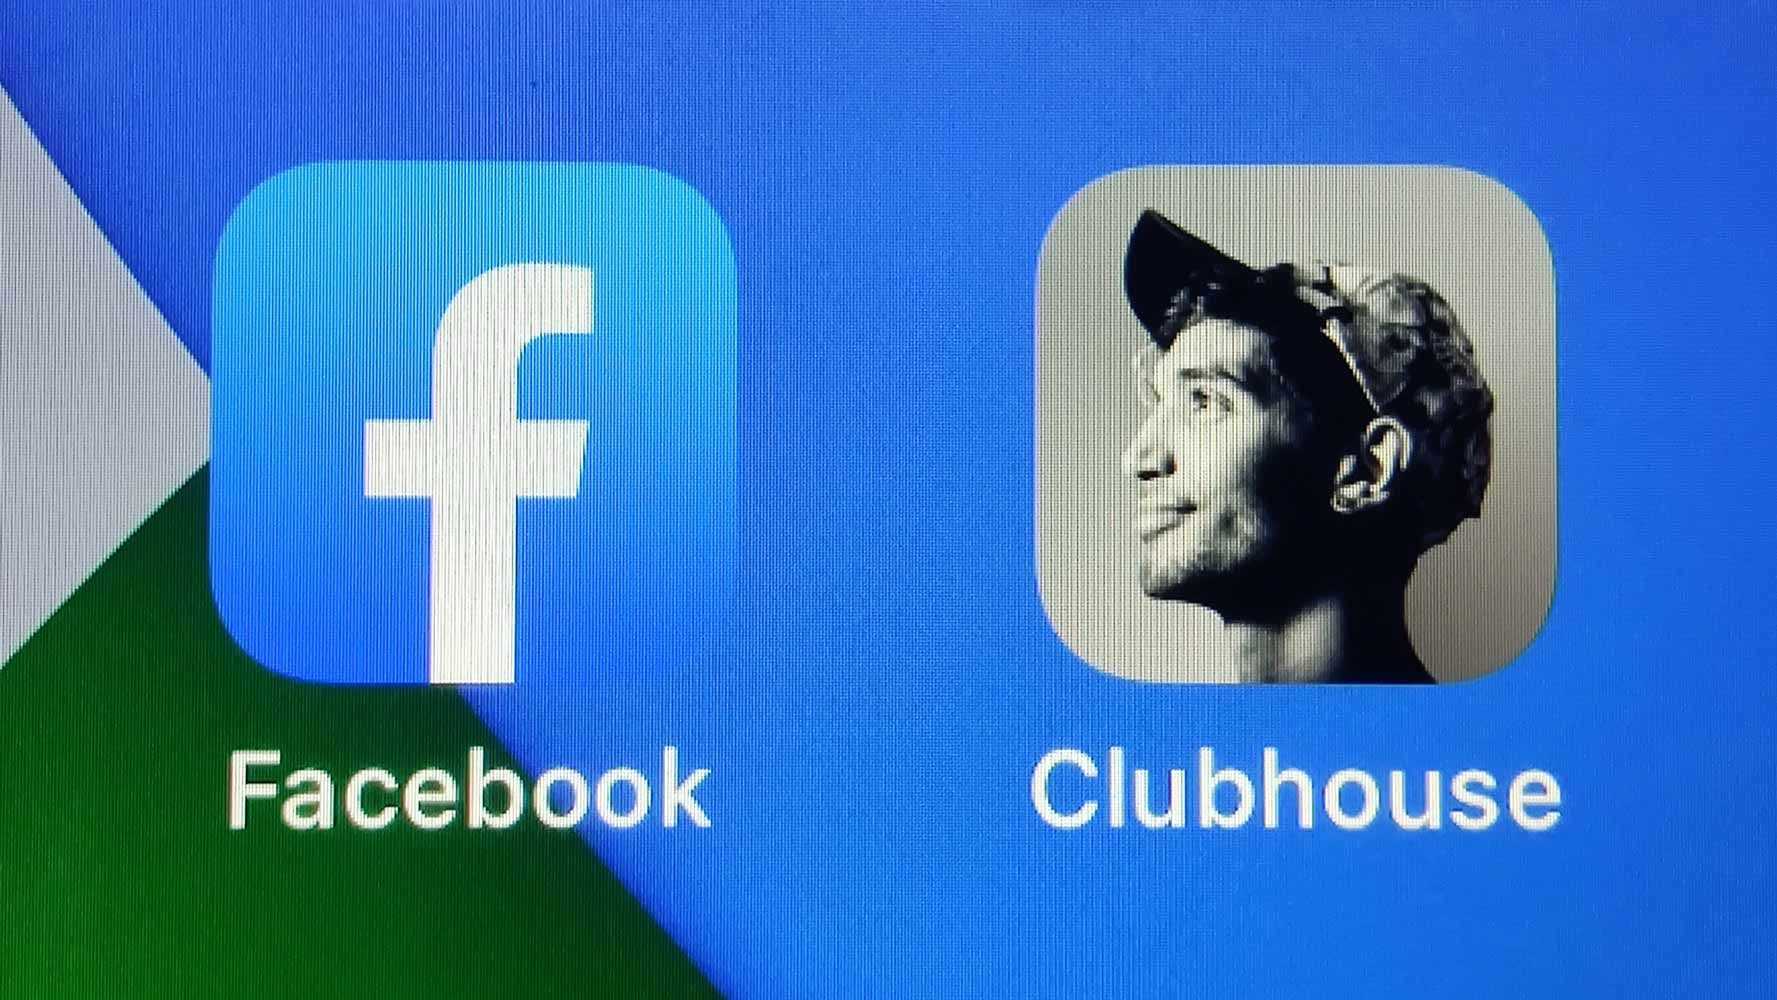 Facebook launches Clubhouse